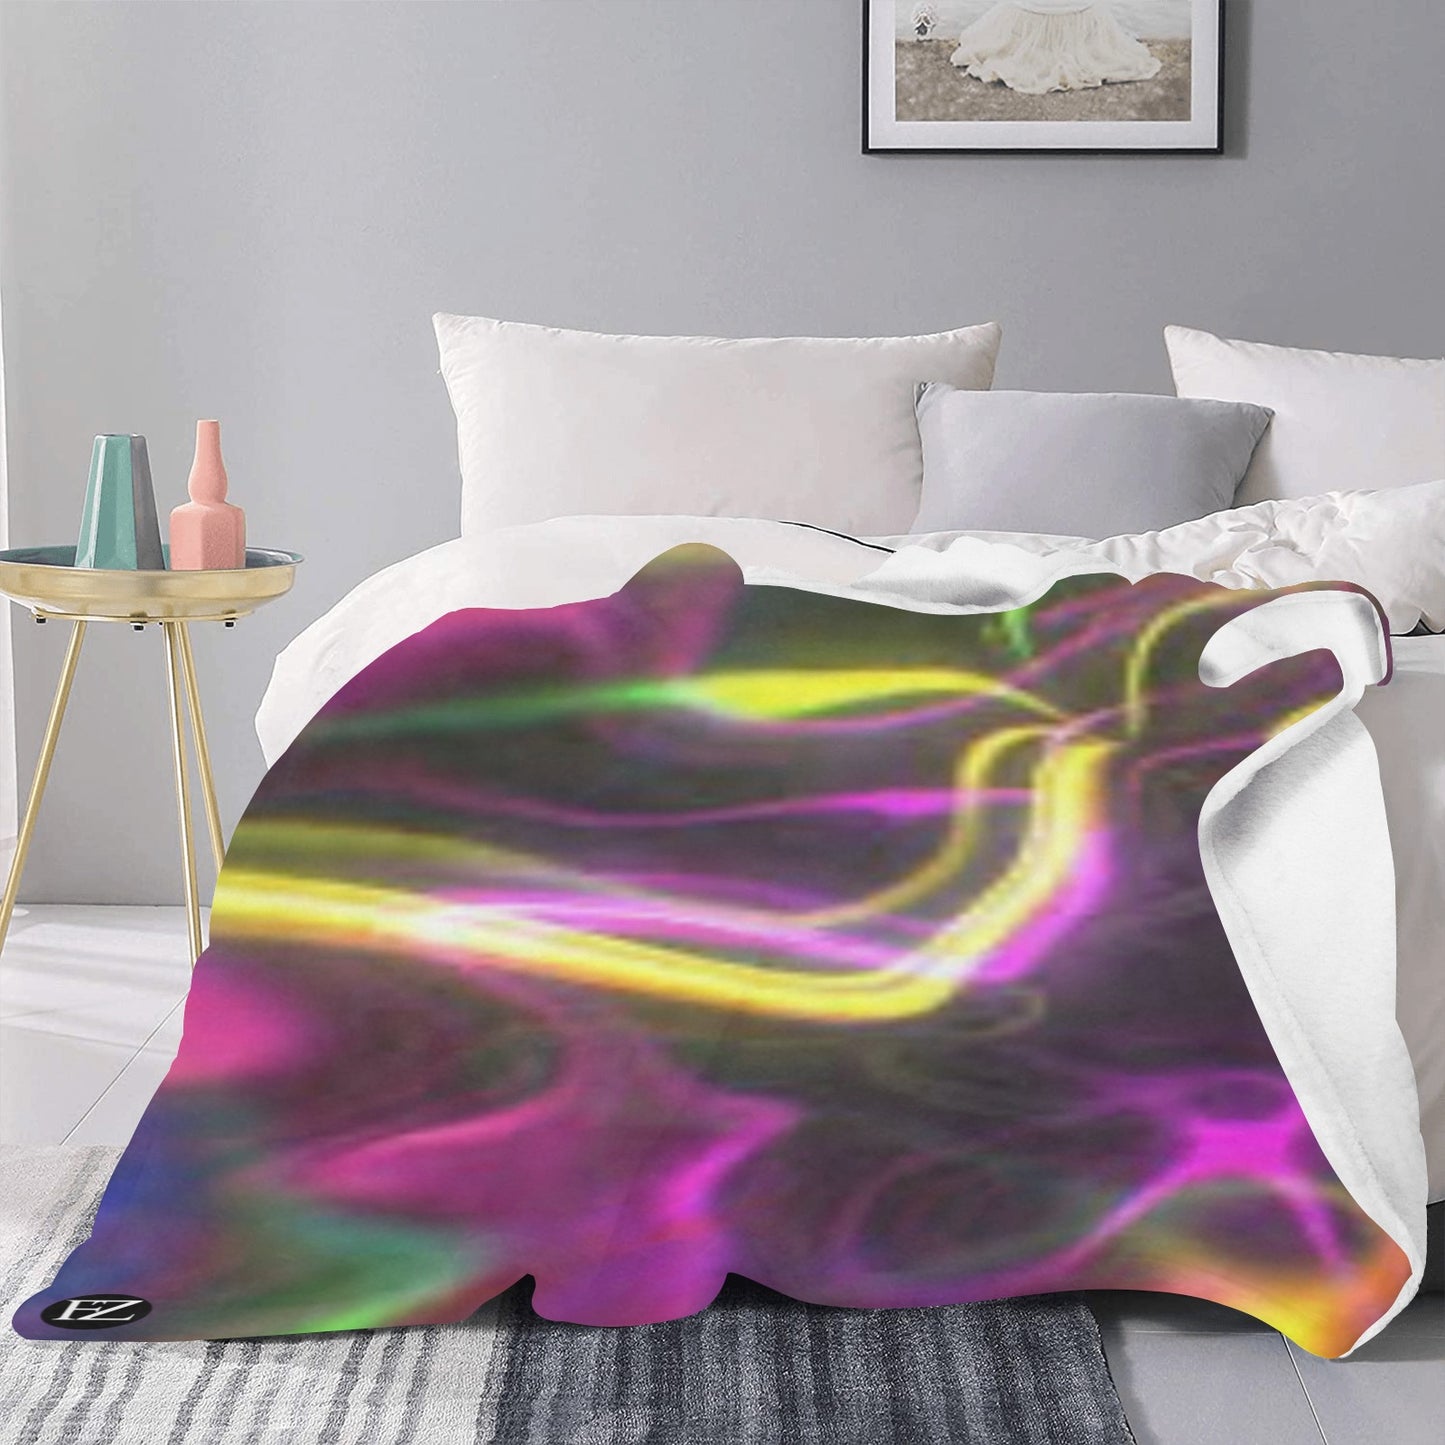 cozy thick blanket abstract 1 ultra-soft micro fleece blanket 60"x80" (thick)